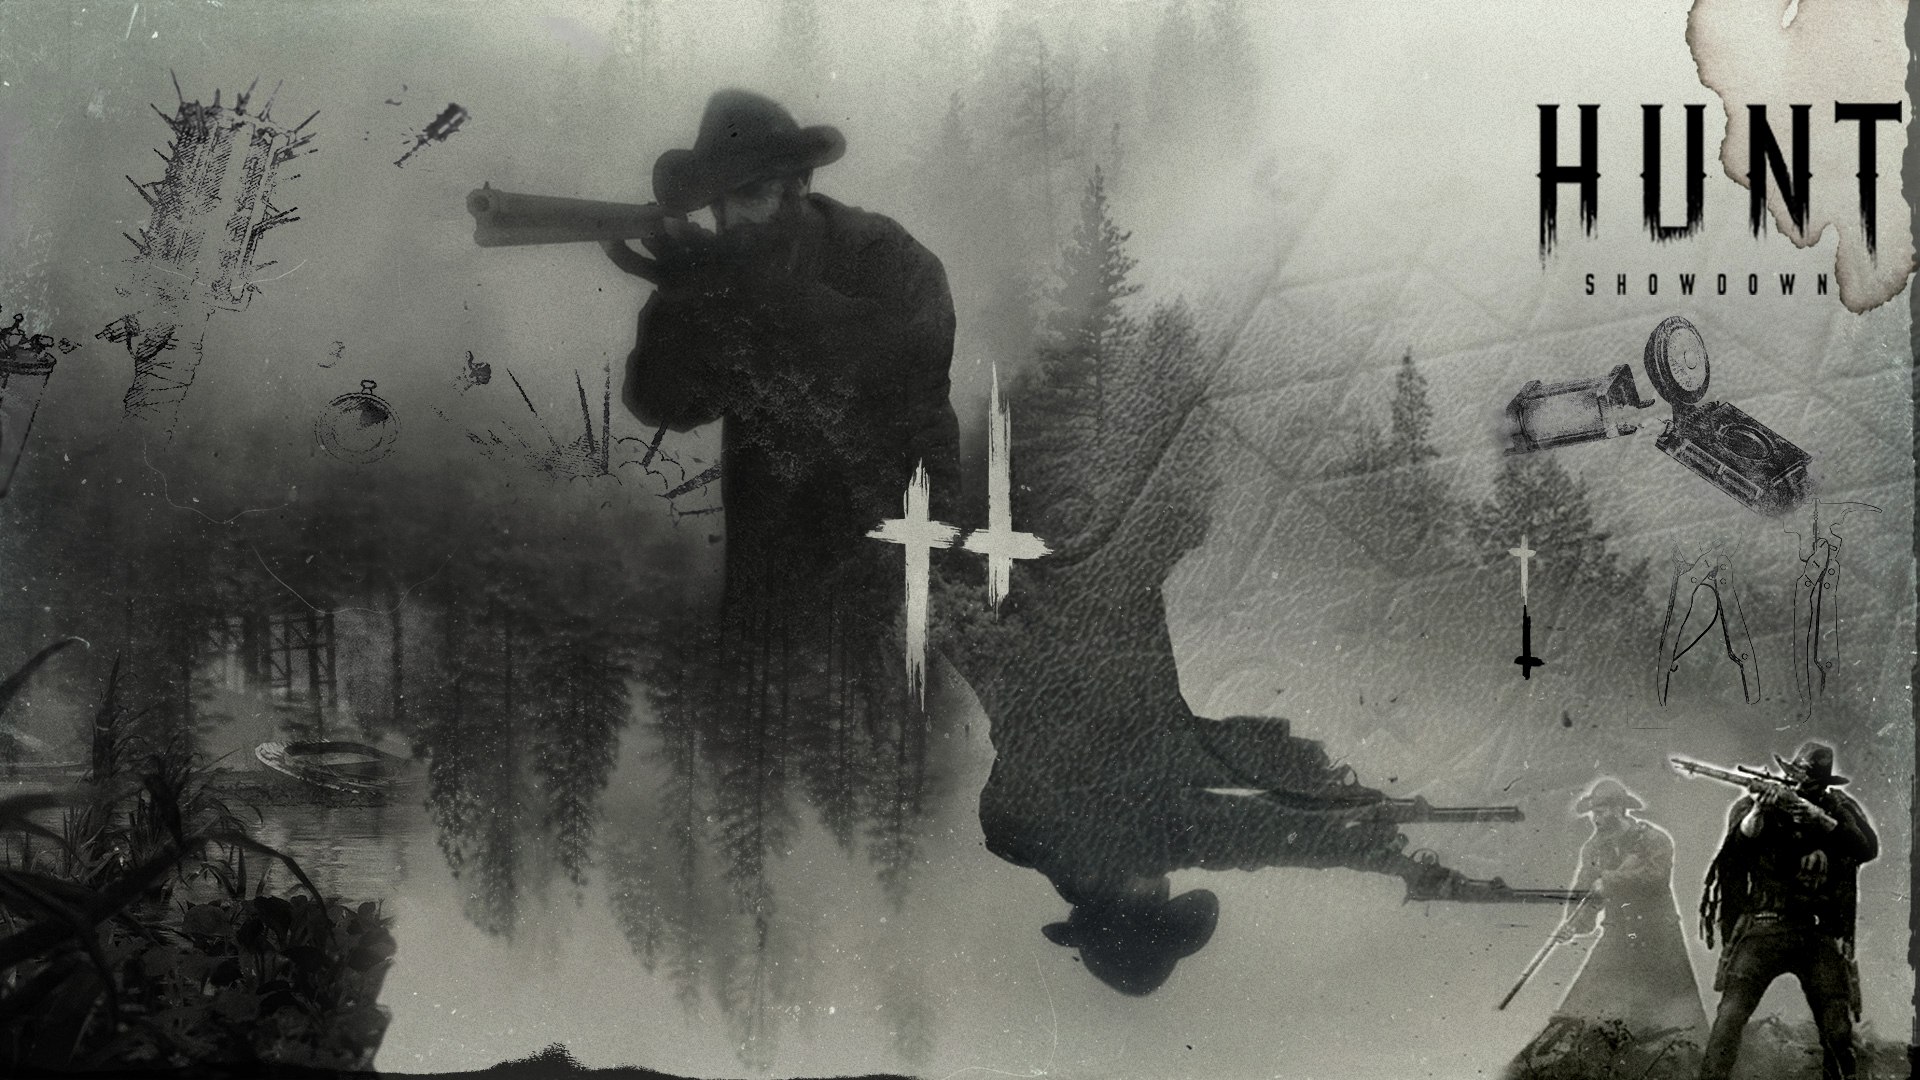 From Dusk till Dawn The Endless Hunt in Hunt Showdown